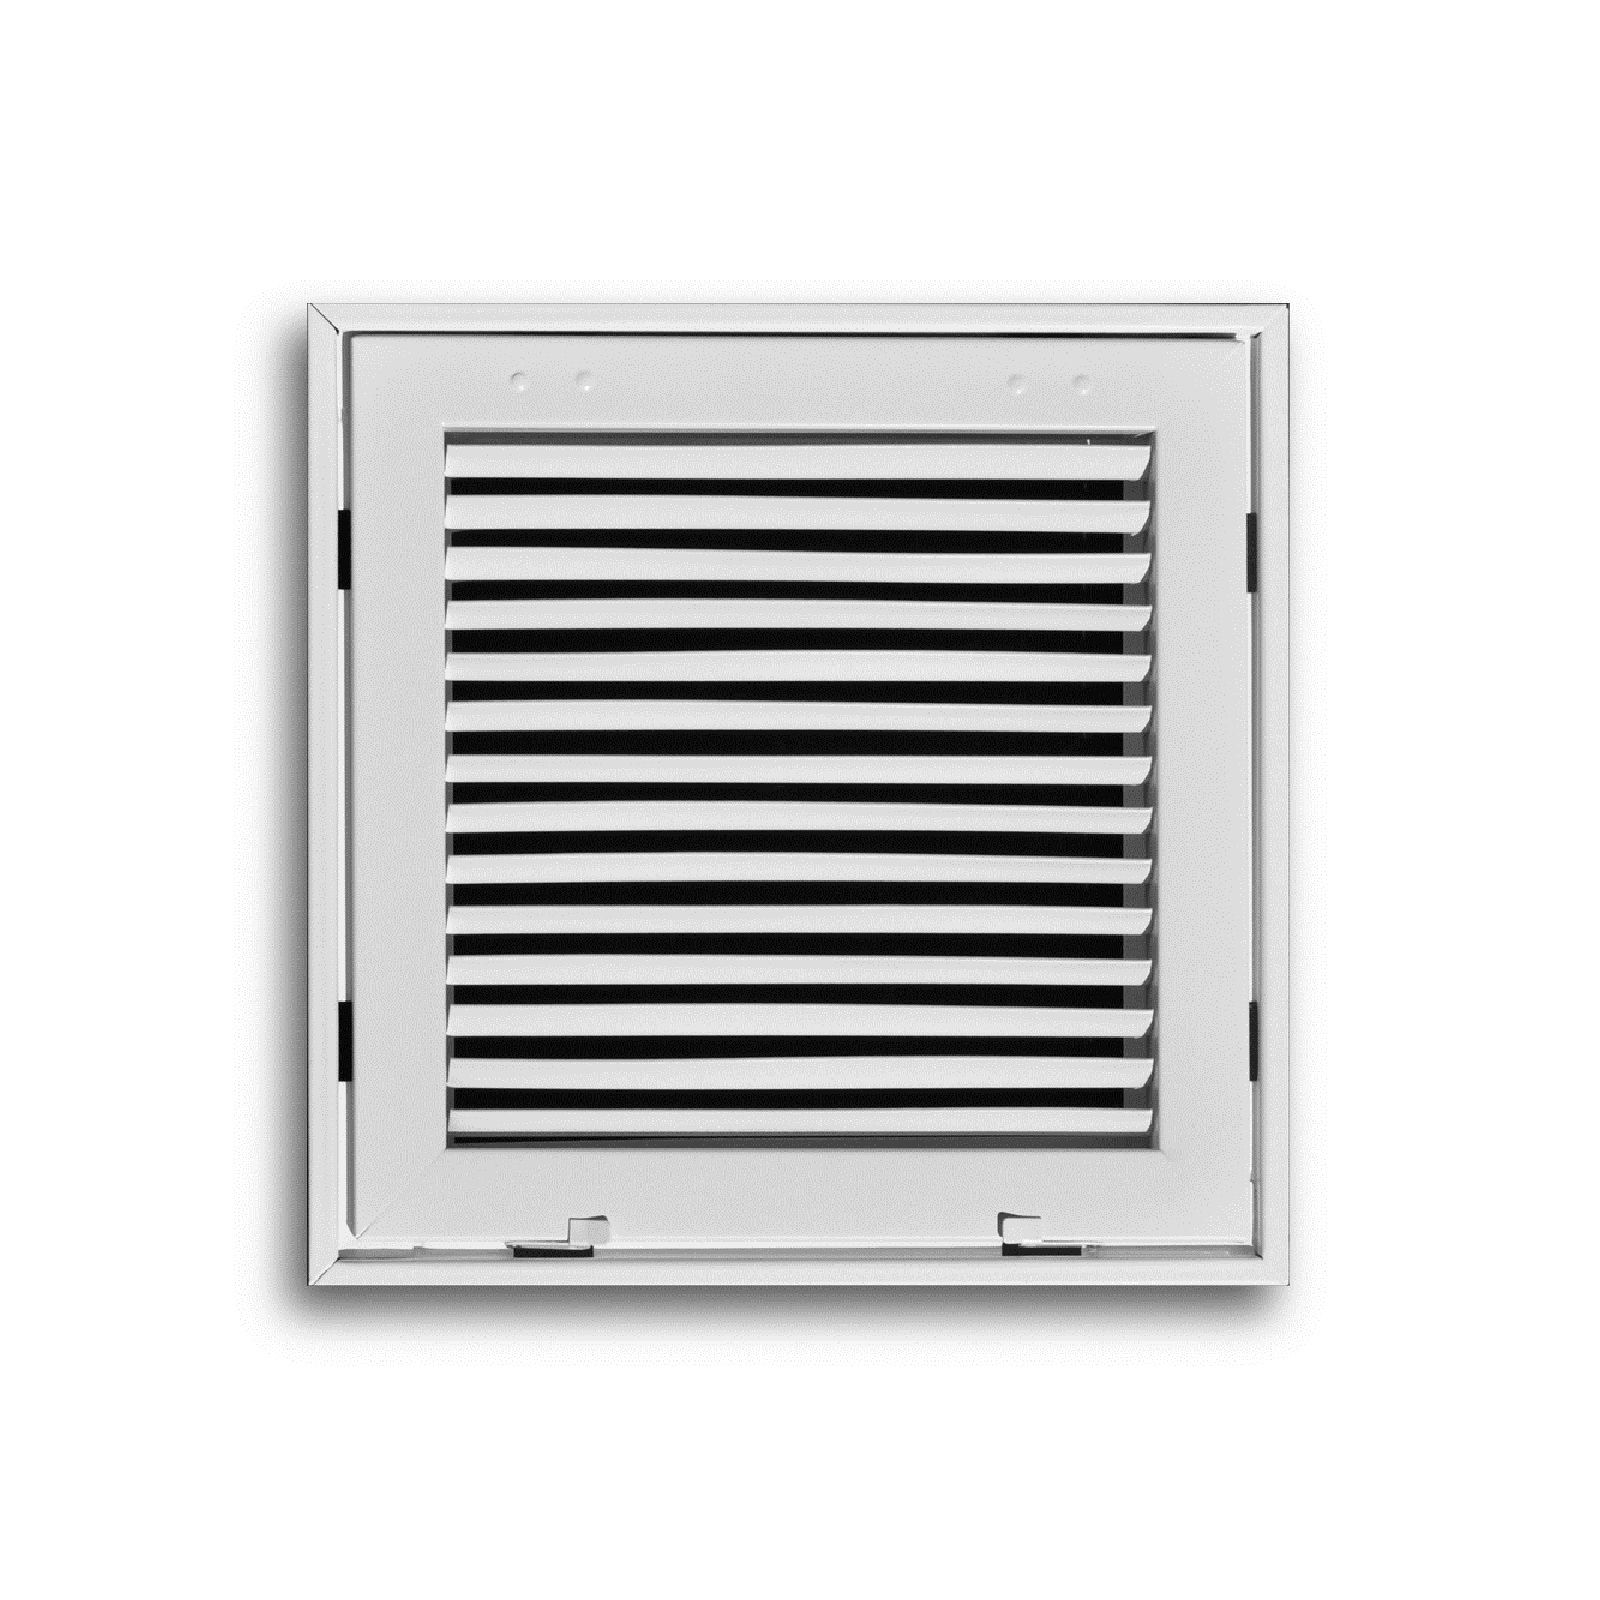 TRUaire 290 14X14 - Steel Fixed Bar Return Air Filter Grille, White, 14" X 14"